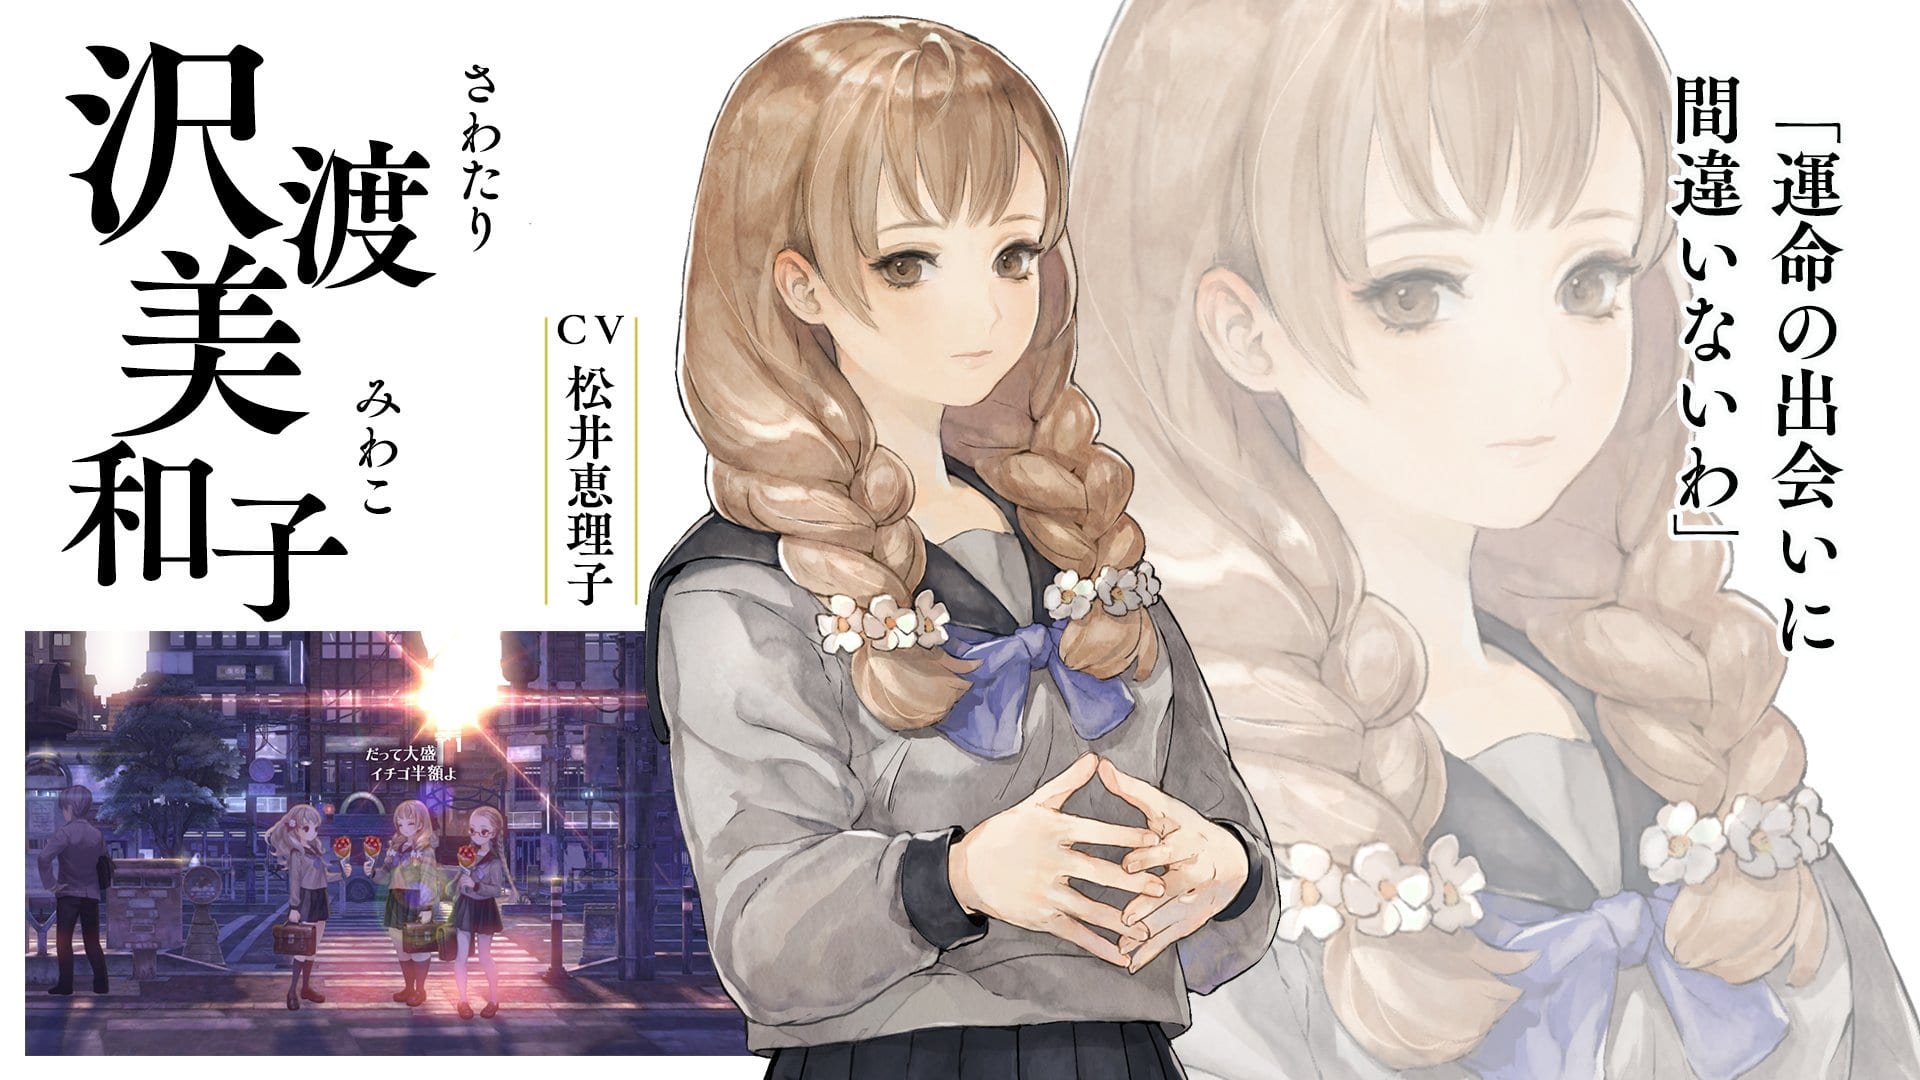 13 Sentinels: Aegis Rim for PS4 Reveals New Characters and New Gameplay